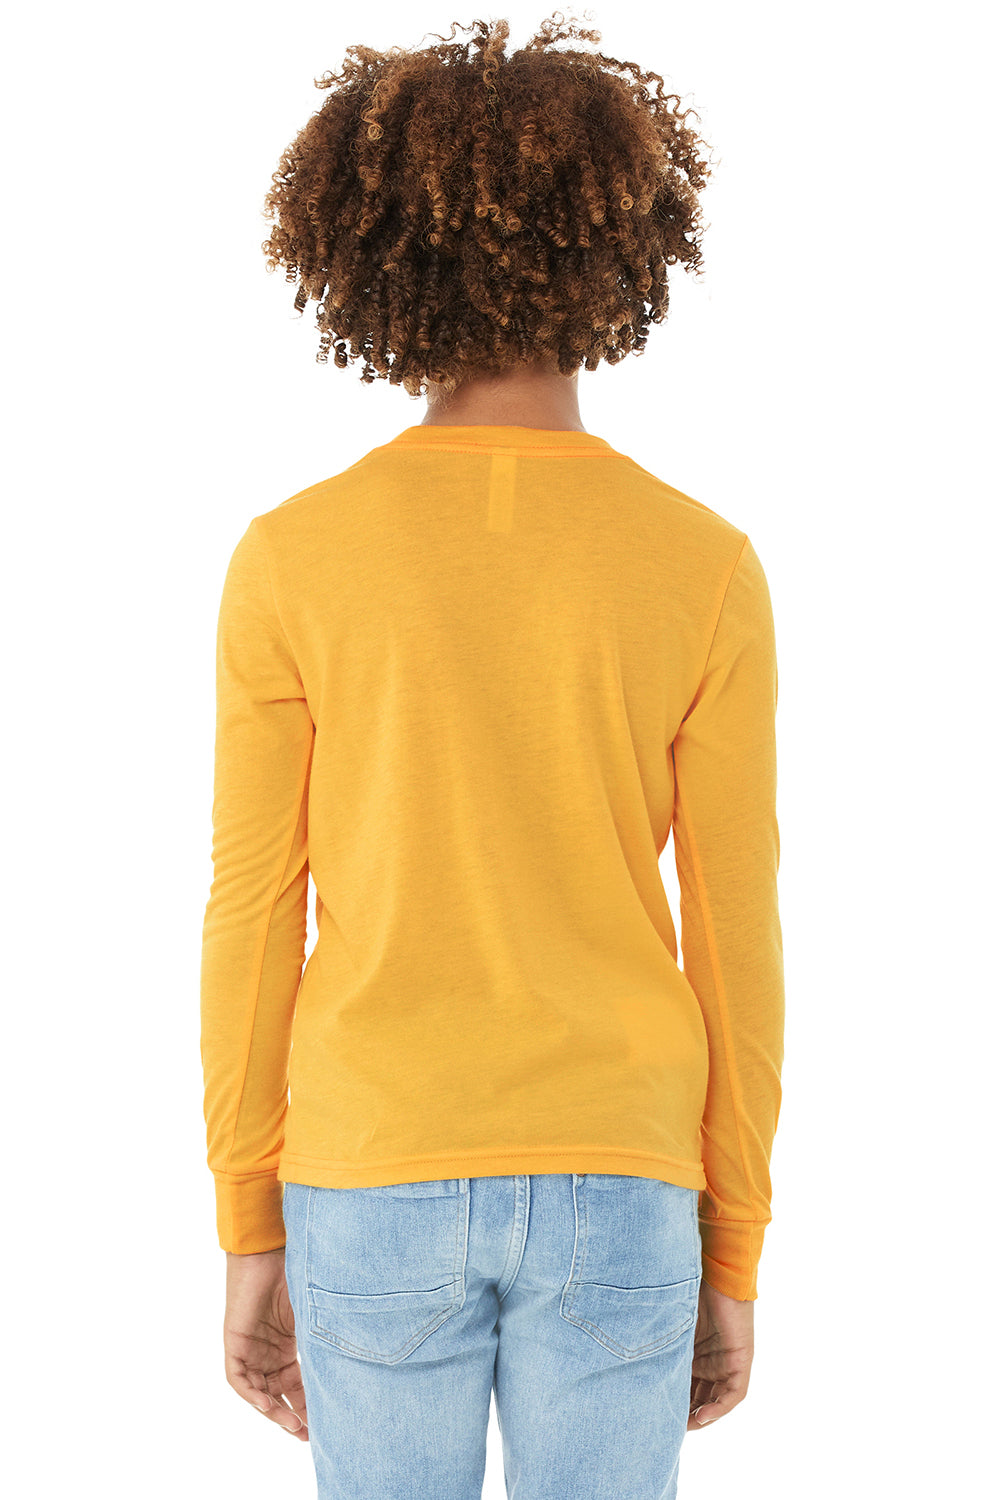 Bella + Canvas 3501Y Youth Jersey Long Sleeve Crewneck T-Shirt Heather Yellow Gold Model Back